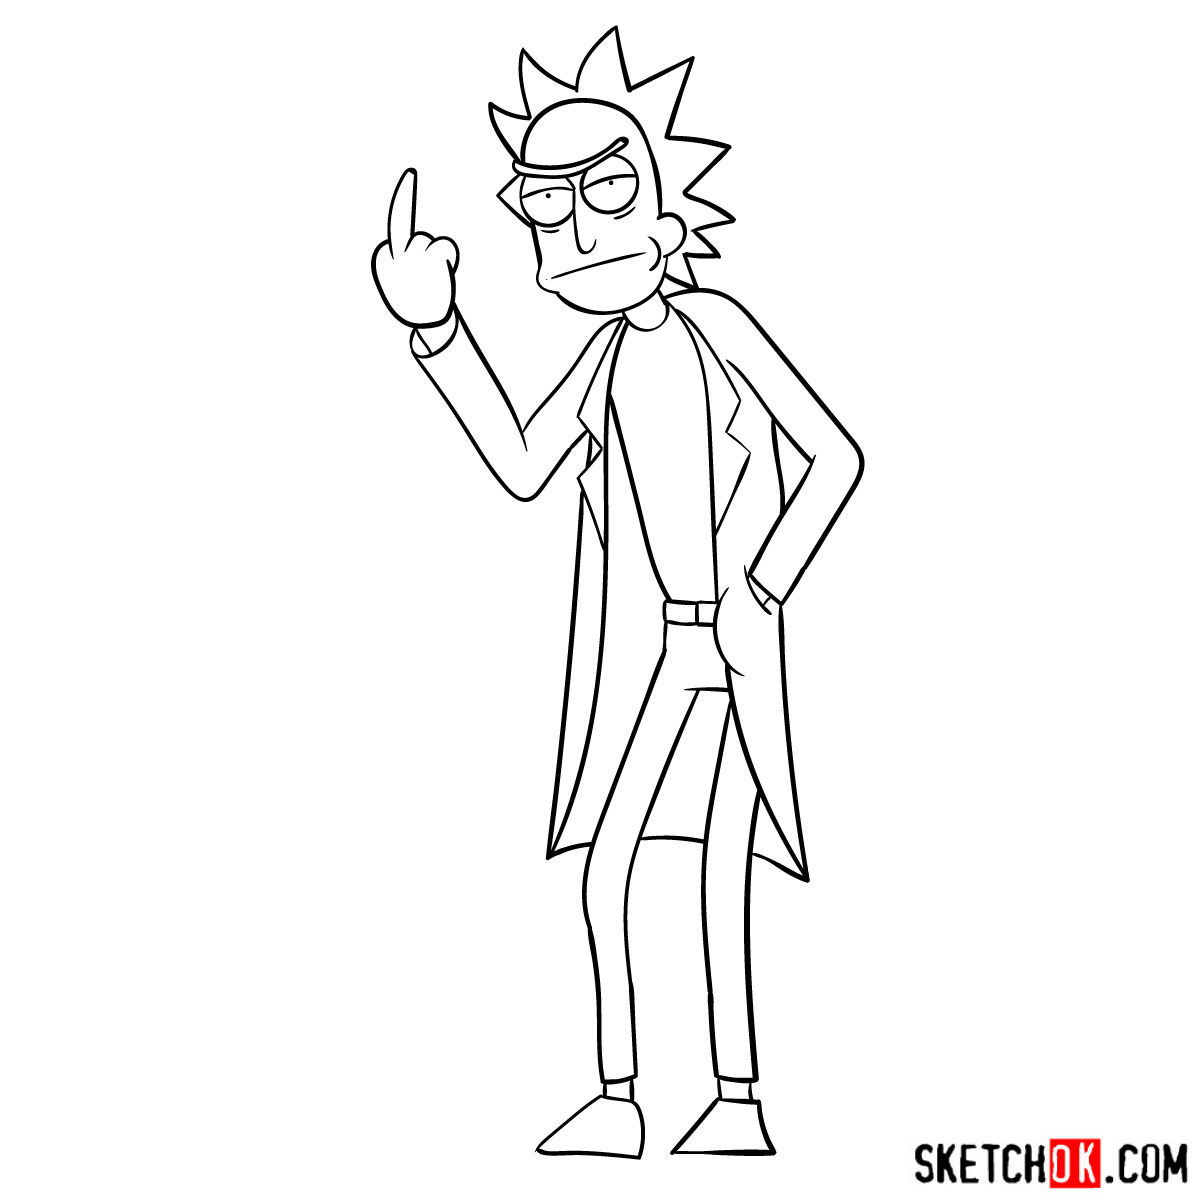 How to draw Rick showing his middle finger (Rick and Morty) - step 14